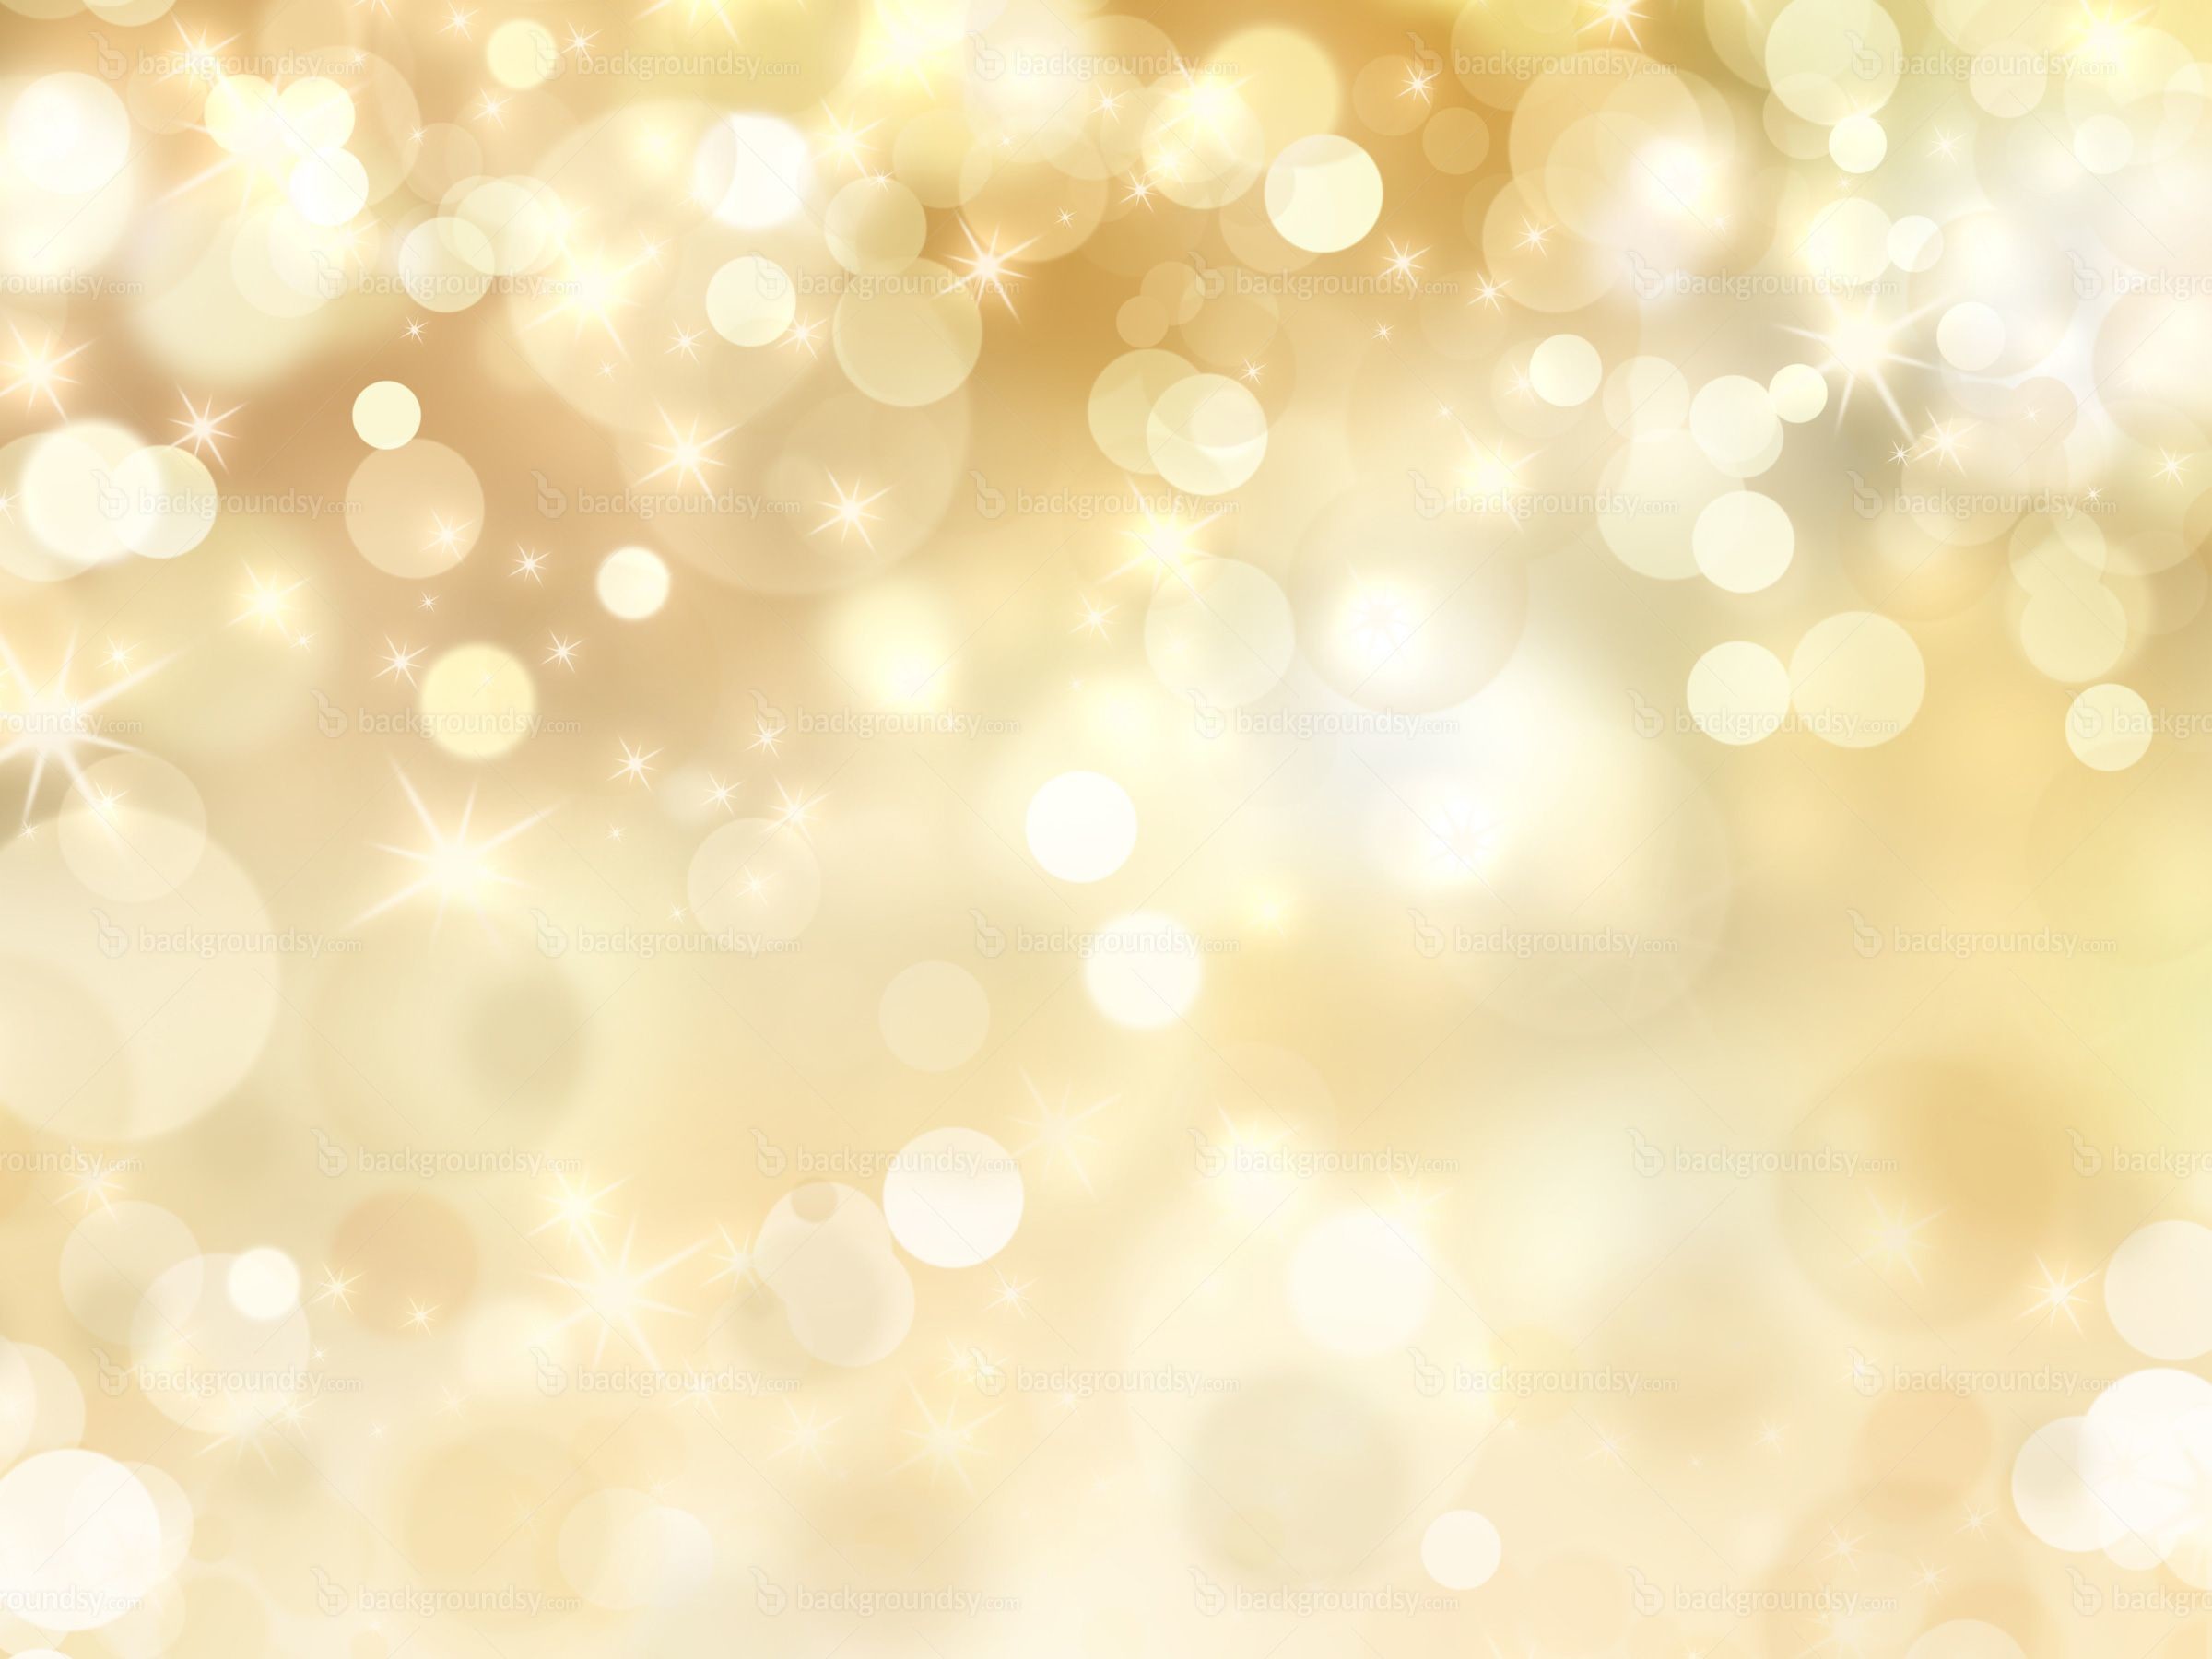 2400x1800 Beautiful Christmas background for printed cards or web related graphics,  abstract yellow background, defocused yellow lights, bokeh effect.